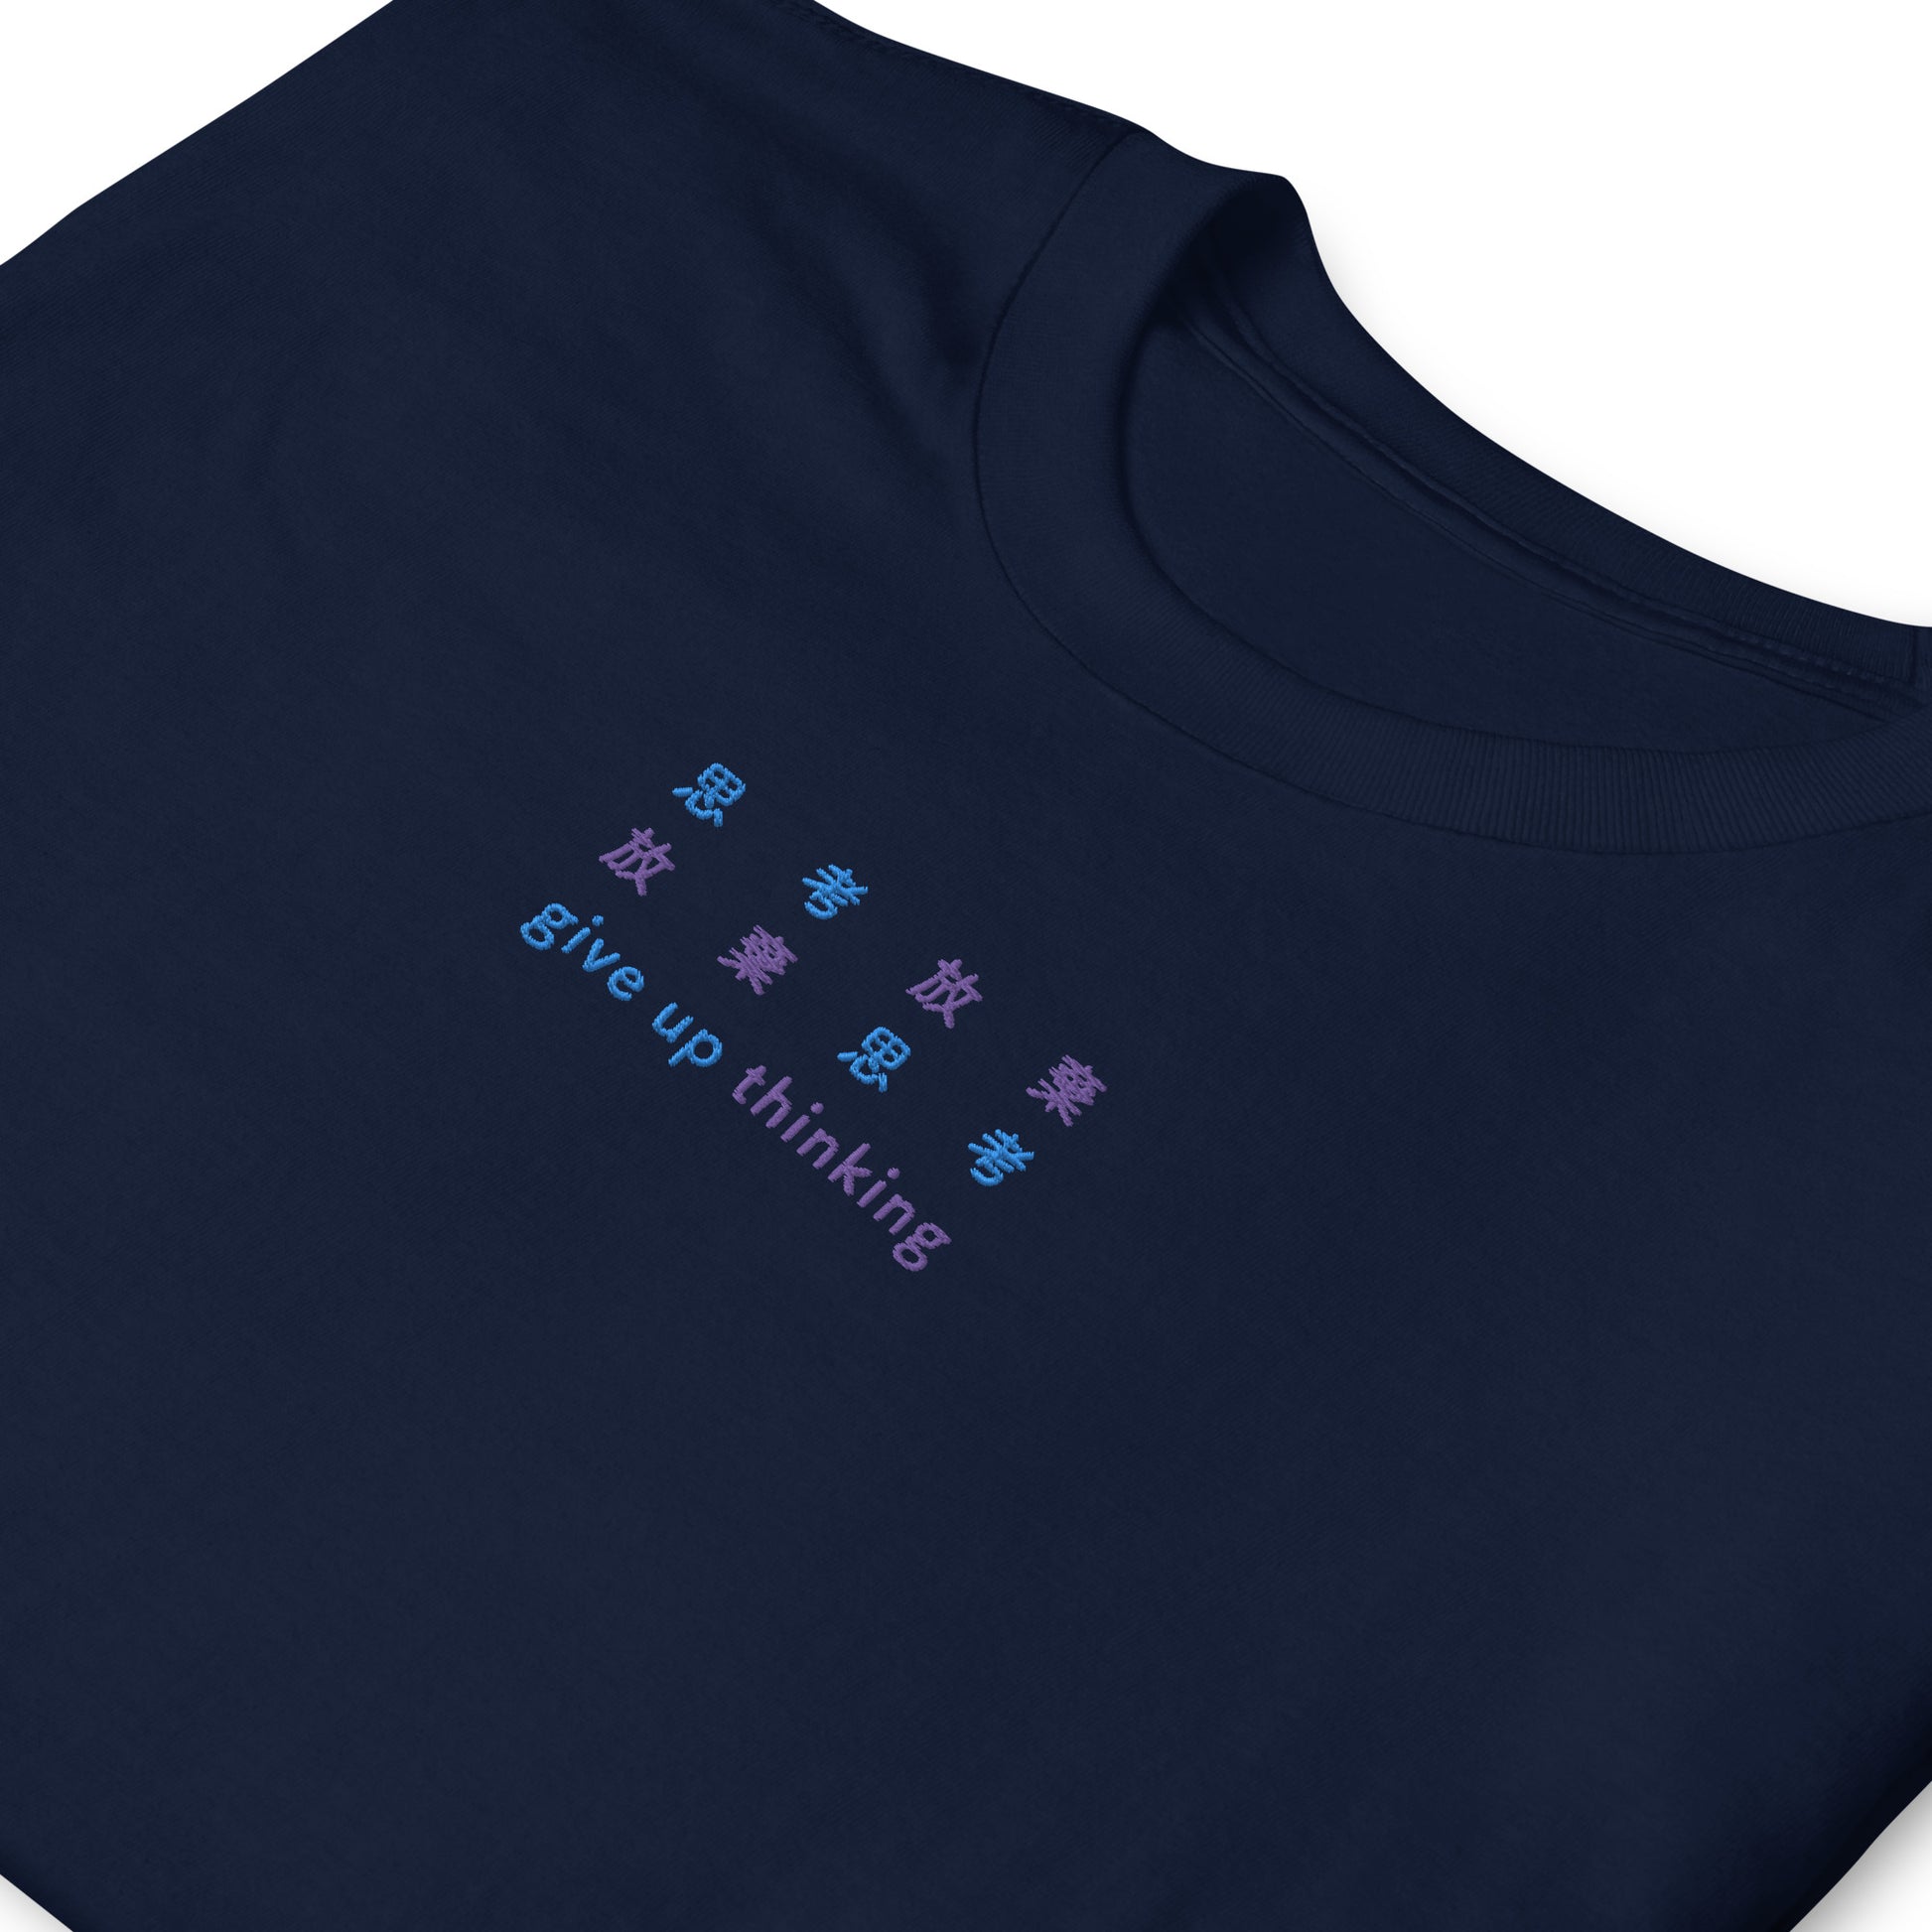 Navy High Quality Tee - Front Design with an Light Blue, Purple Embroidery "Give Up Thinking" in Japanese,Chinese and English